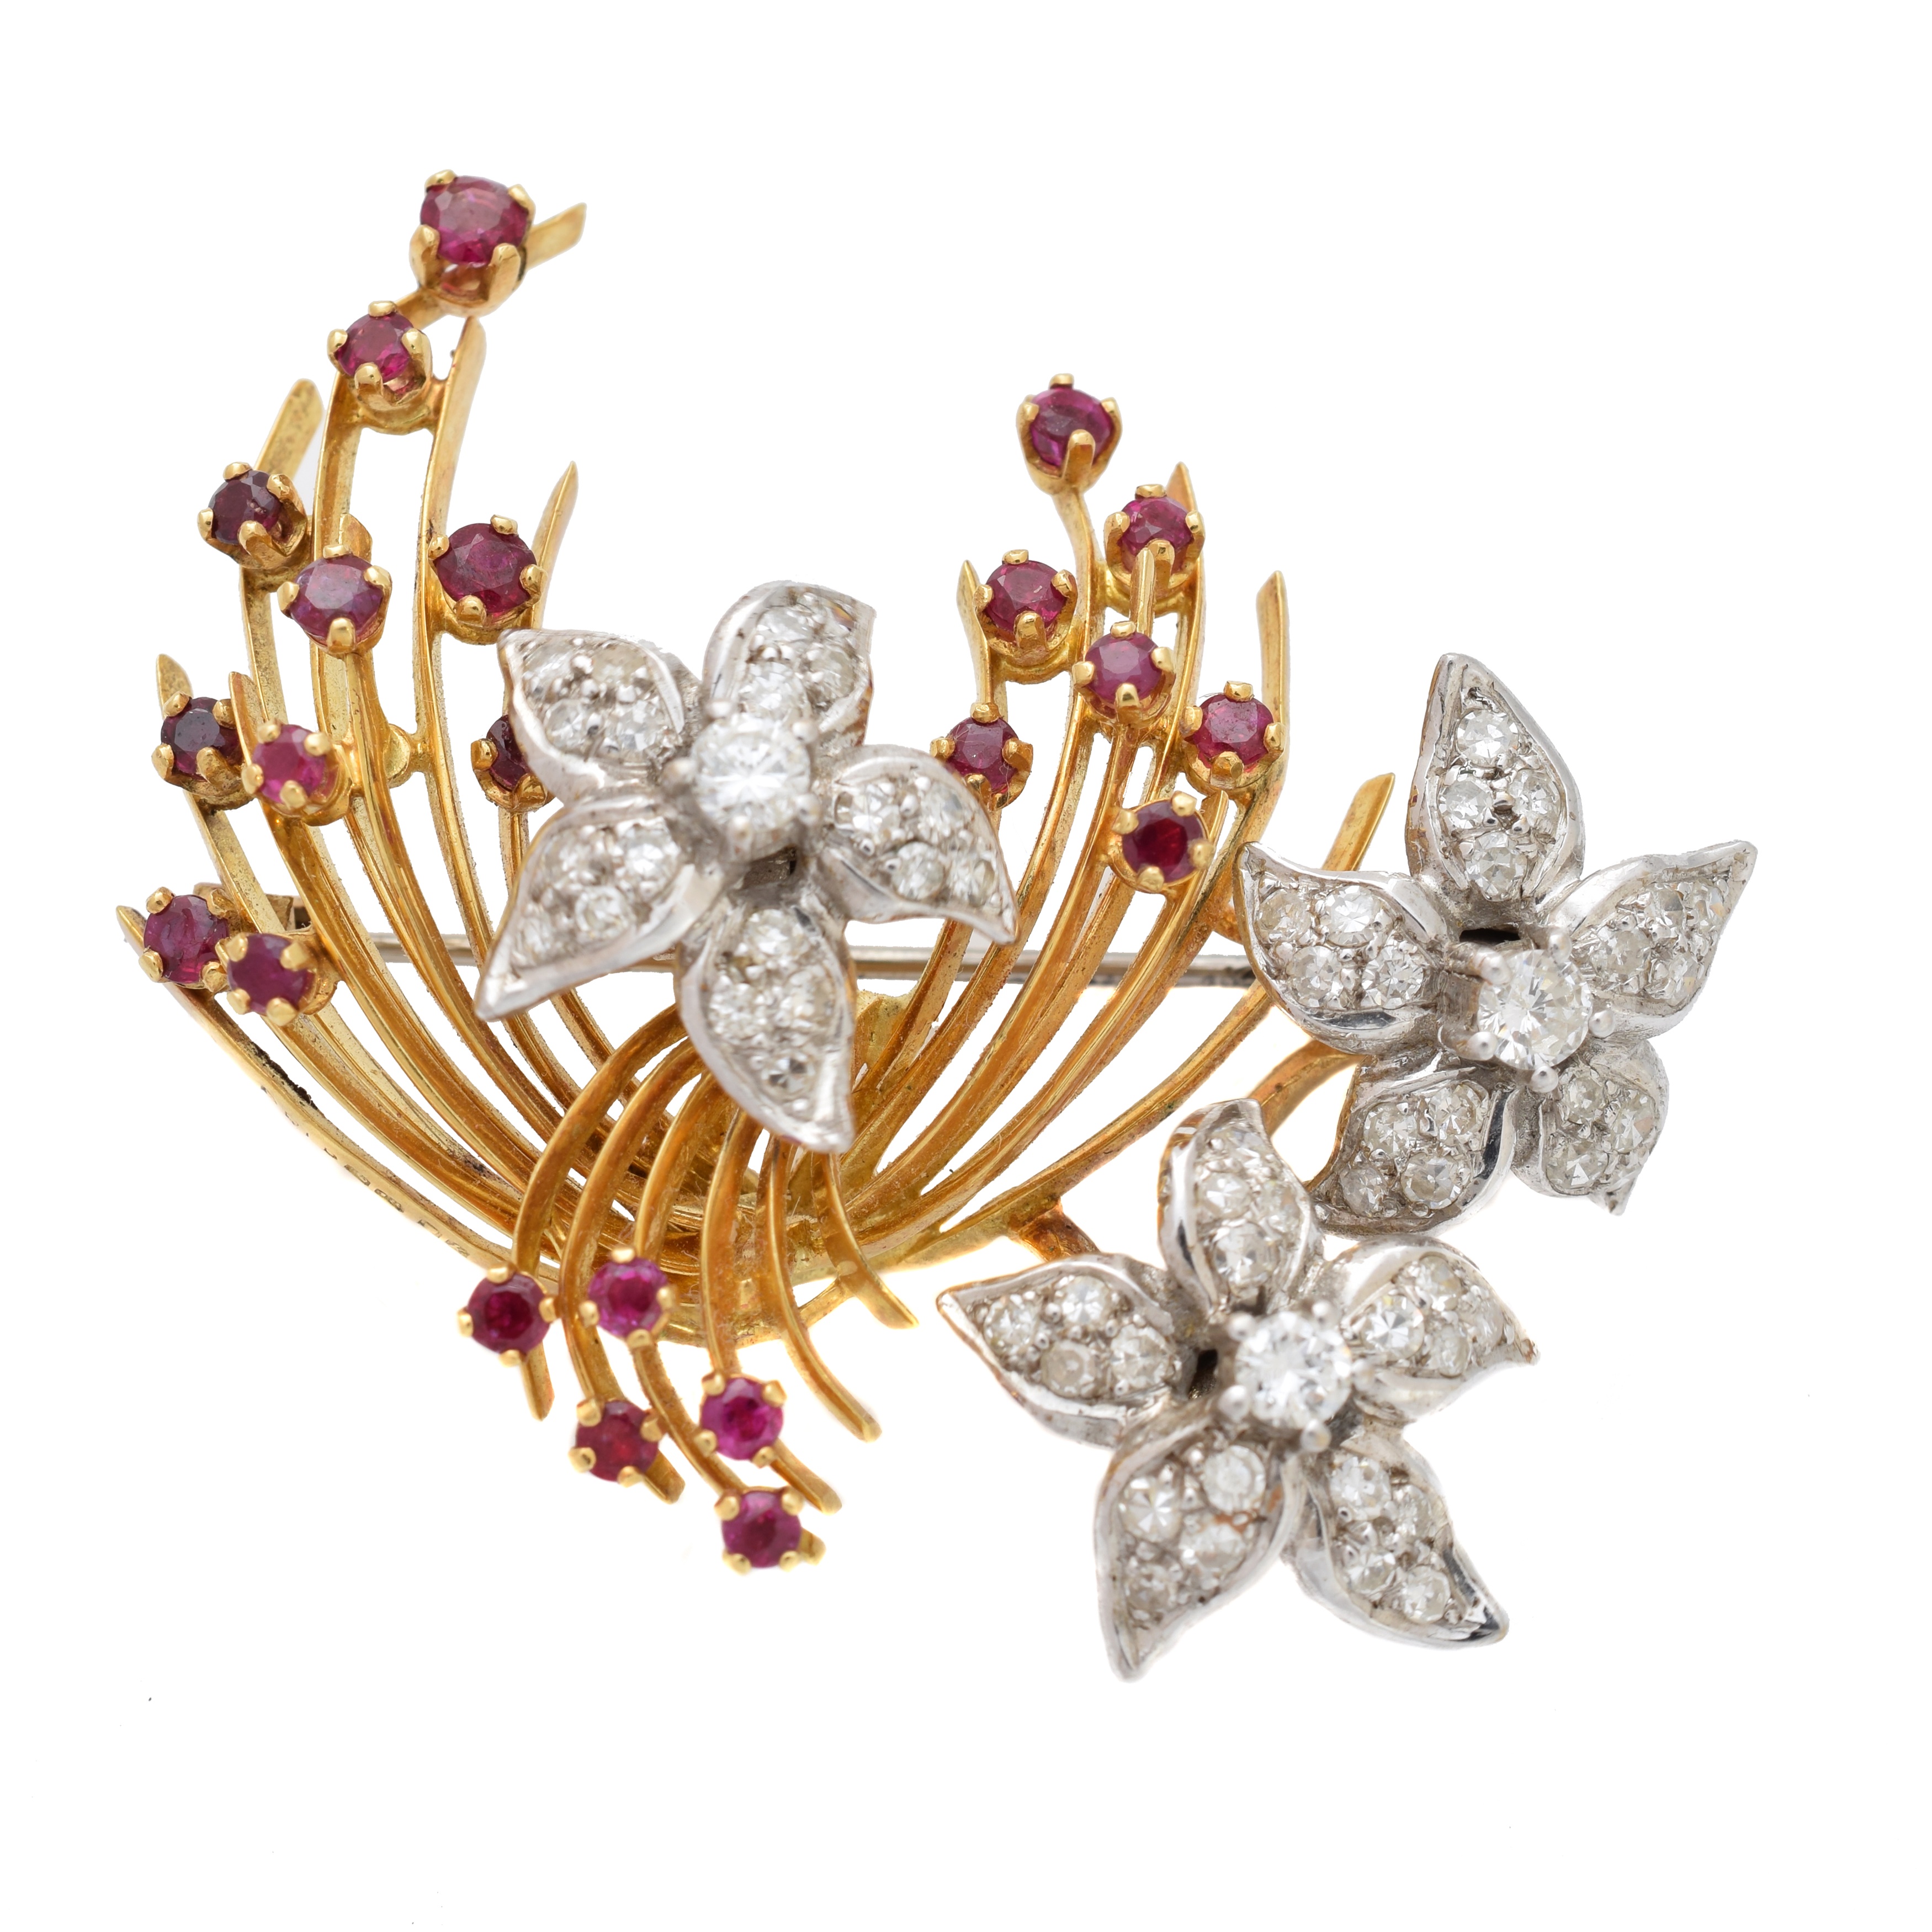 A 1960s 18ct gold diamond and ruby brooch by Ben Rosenfeld, comprising three vari cut diamond clusters, set en tremblant to the vari size circular shape ruby spray, estimated total diamond weight 1.55cts, maker's marks for Ben Rosenfeld, hallmarks for London, 1965, length 4.7cm, gross weight 19.3g.